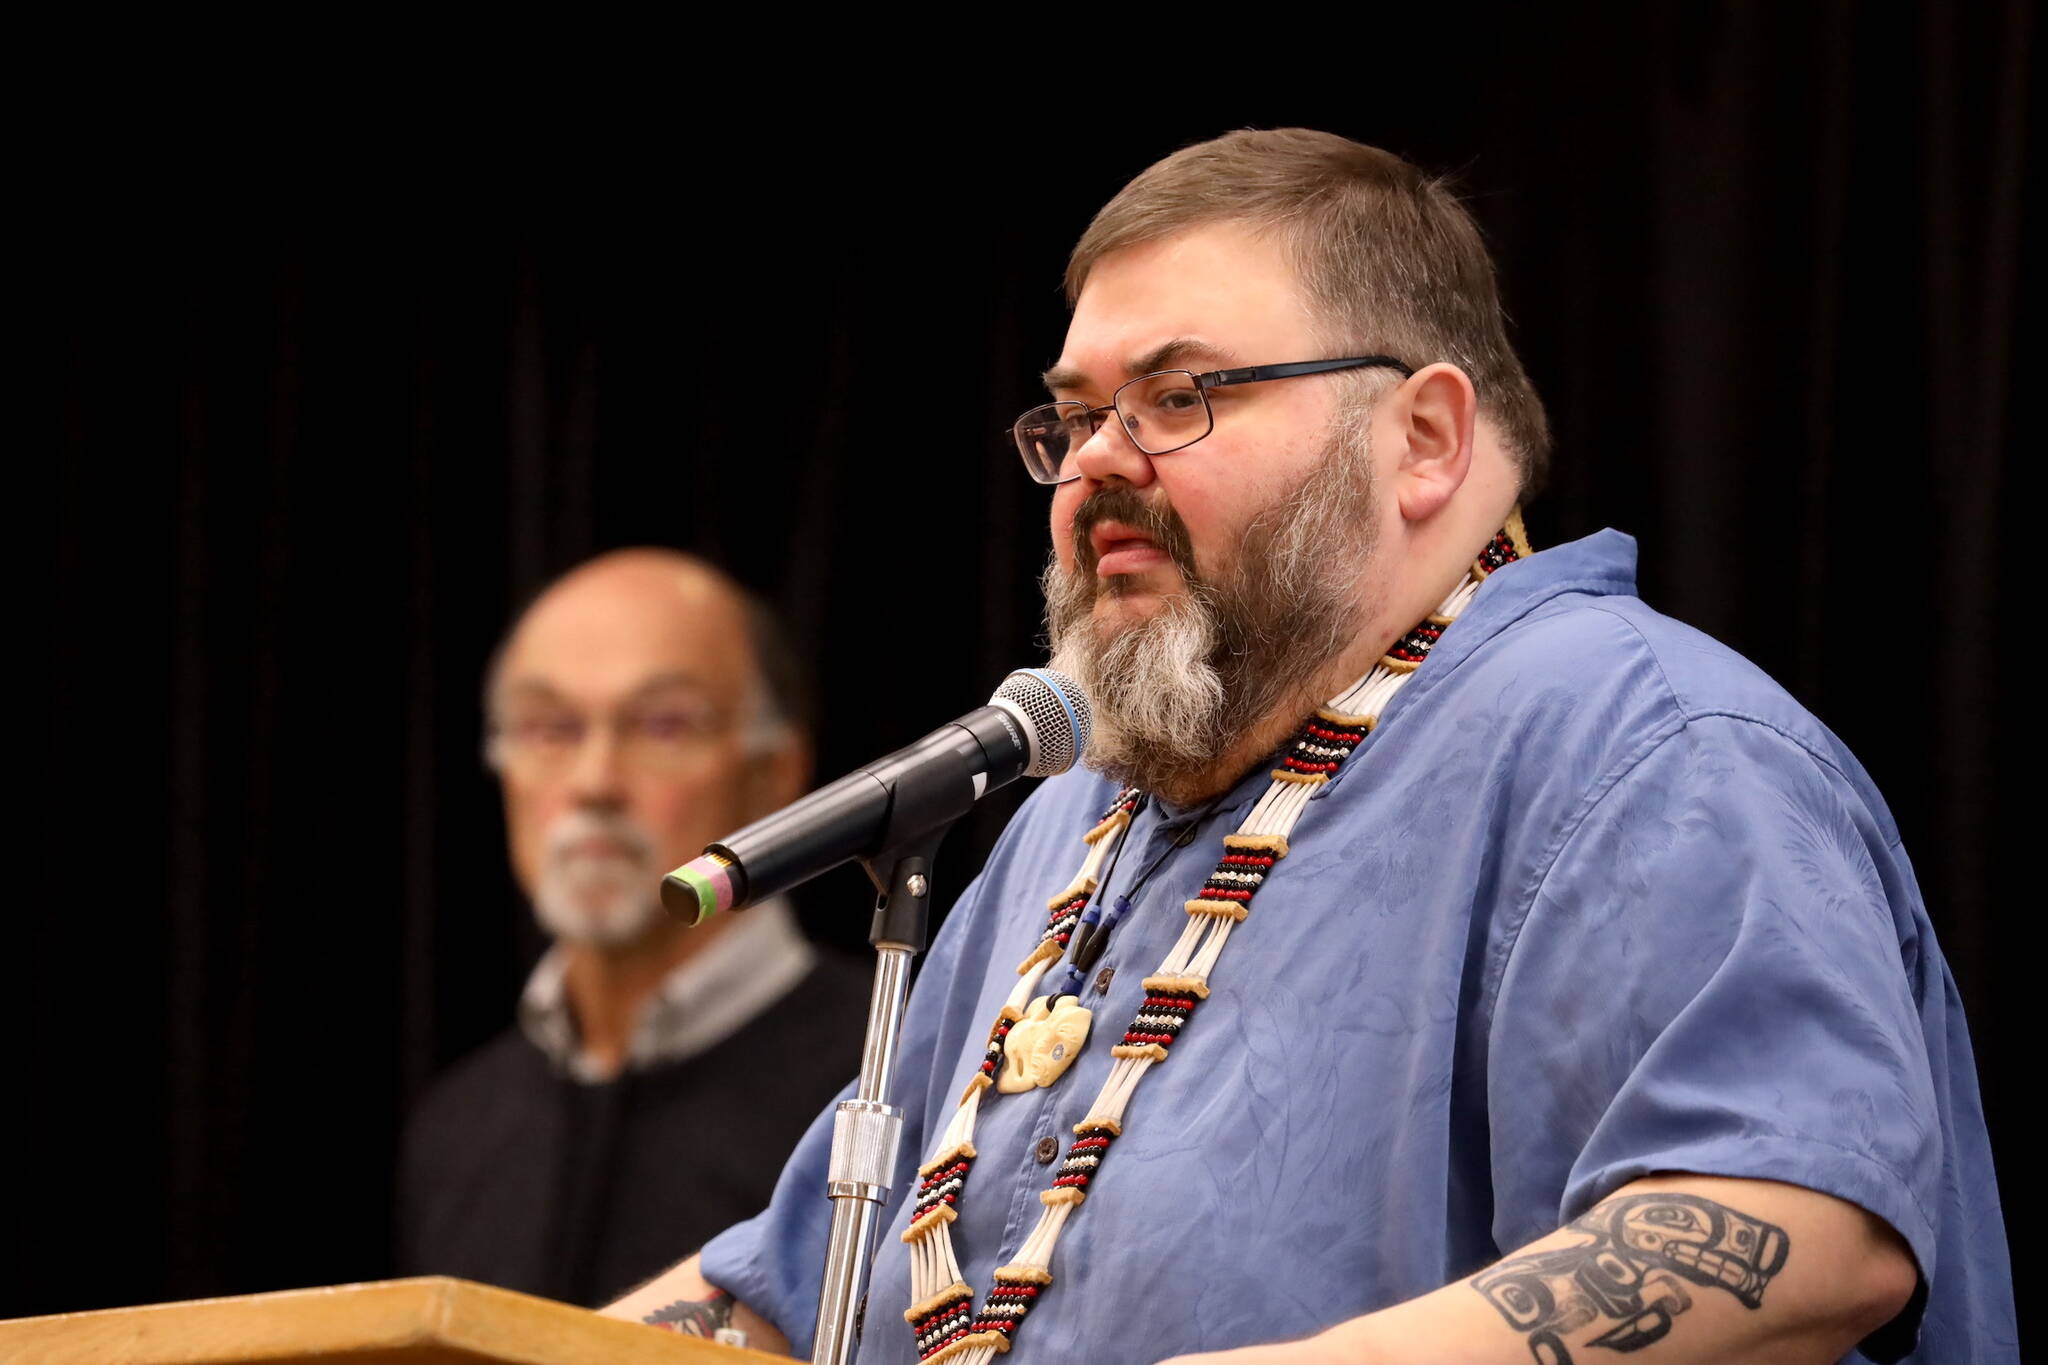 Richard Chalyee Éesh Peterson, president of the Central Council of the Tlingit and Haida Indian Tribes of Alaska, speaks to the crowd on stage during a healing event on Indigenous Peoples’ Day on Monday to acknowledge and accept an apology of the closure of Juneau’s Memorial Presbyterian Church in 1962. (Clarise Larson / Juneau Empire)